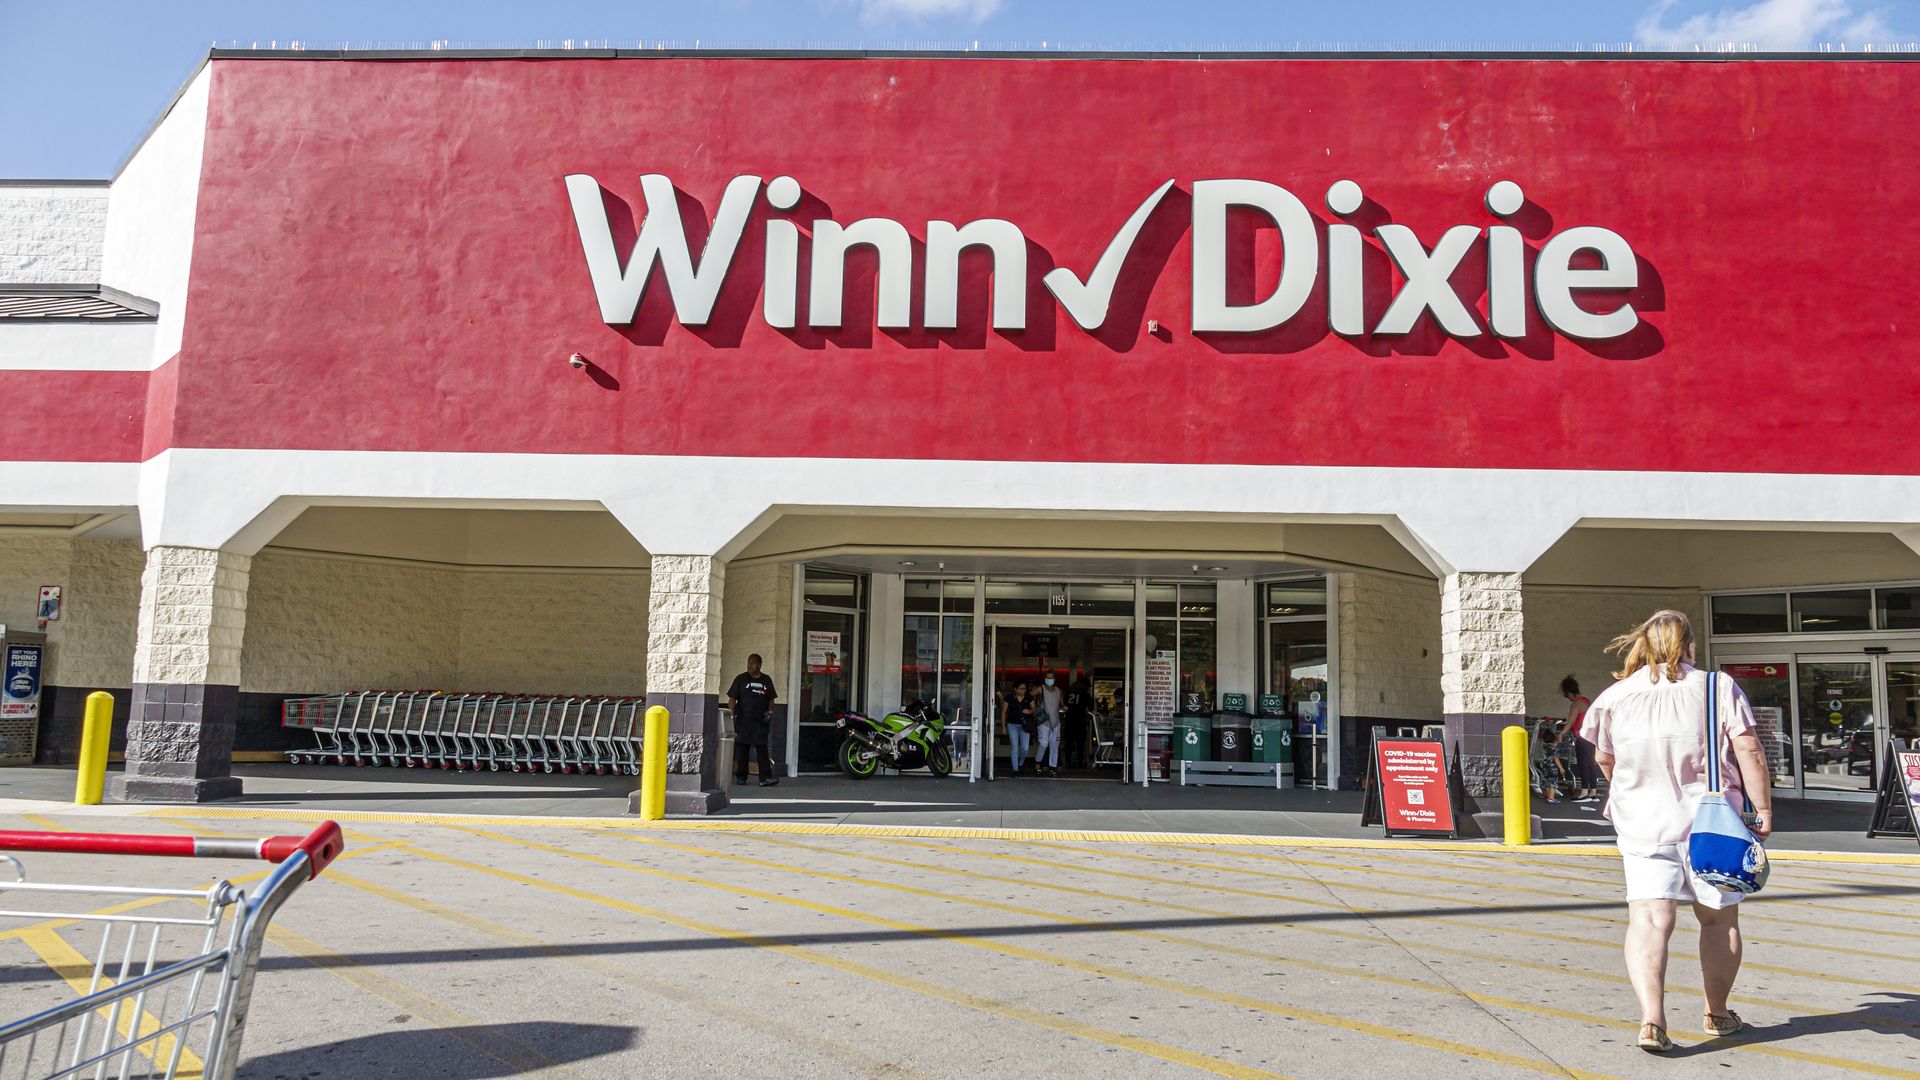 Photo shows the exterior of a Winn-Dixie store